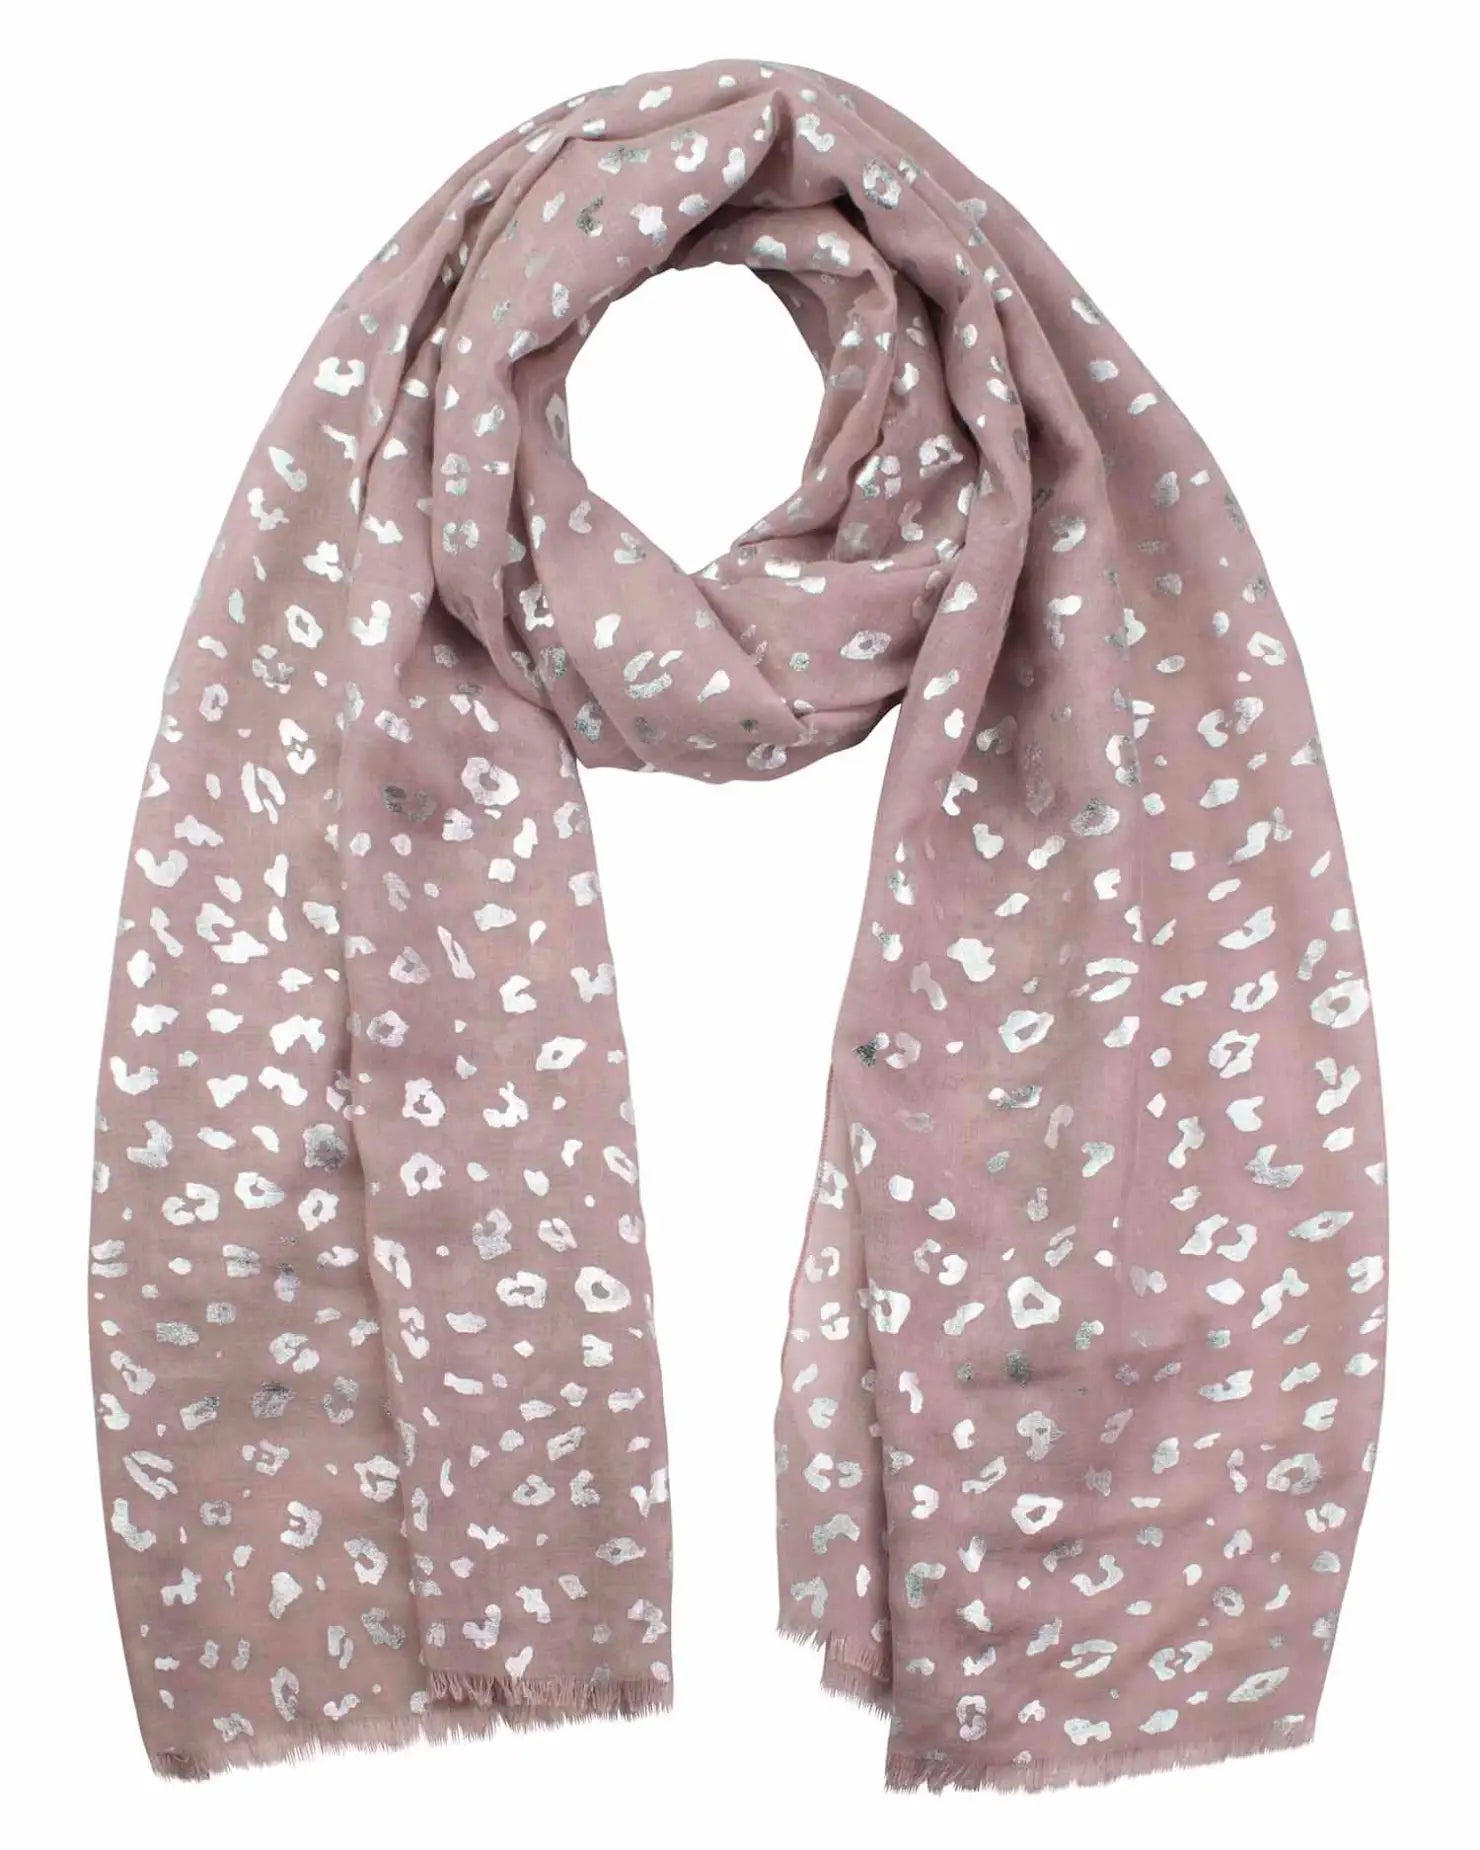 Pink heart scarf with silver foil leopard print.